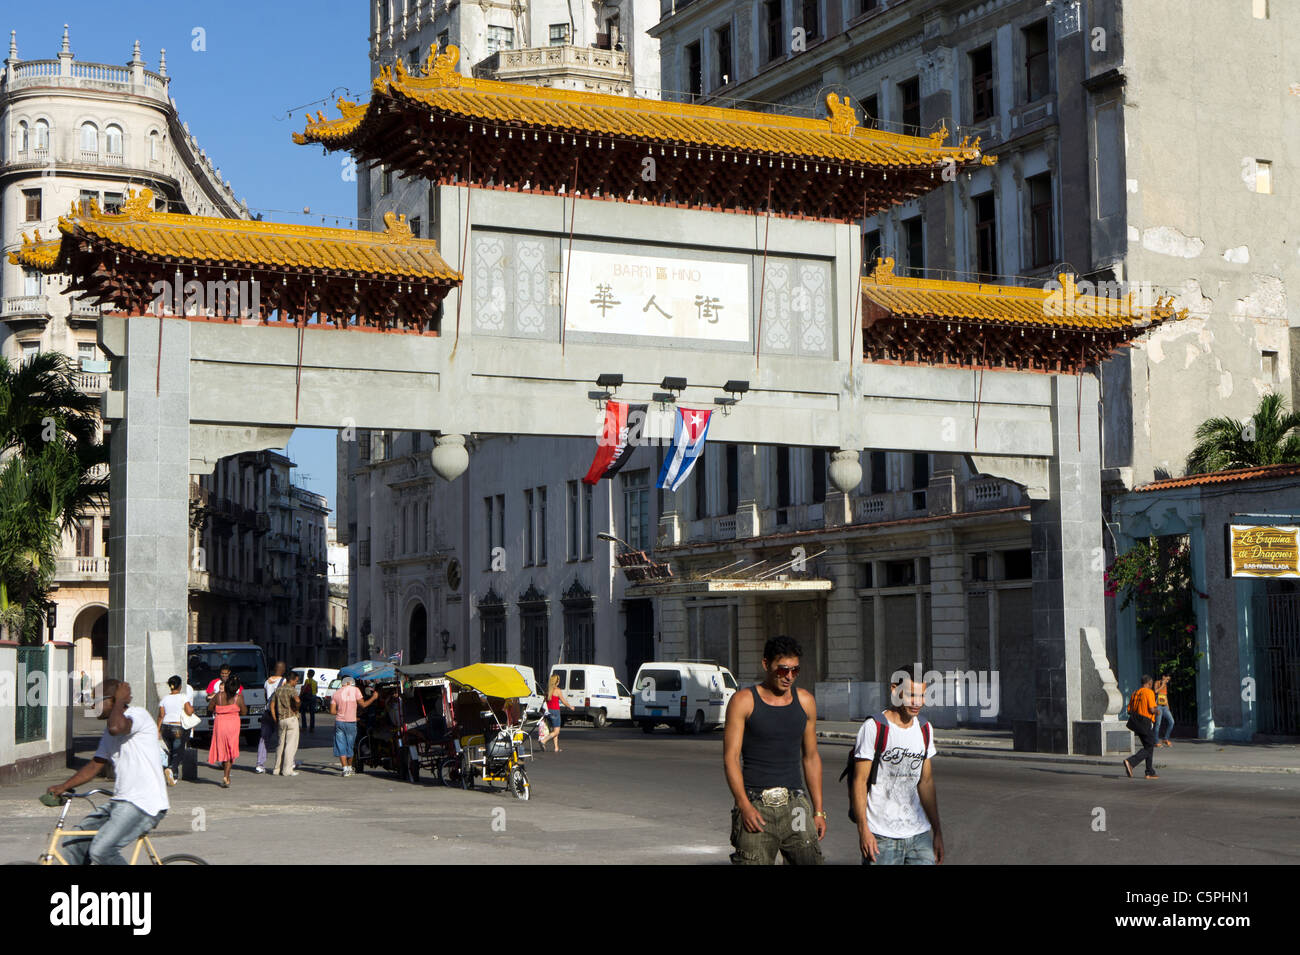 Entrance Gate to Havana's Chinatown (known as Barrio Chino de La Habana), Cuba. This gate was a gift from China in 1999. Stock Photo